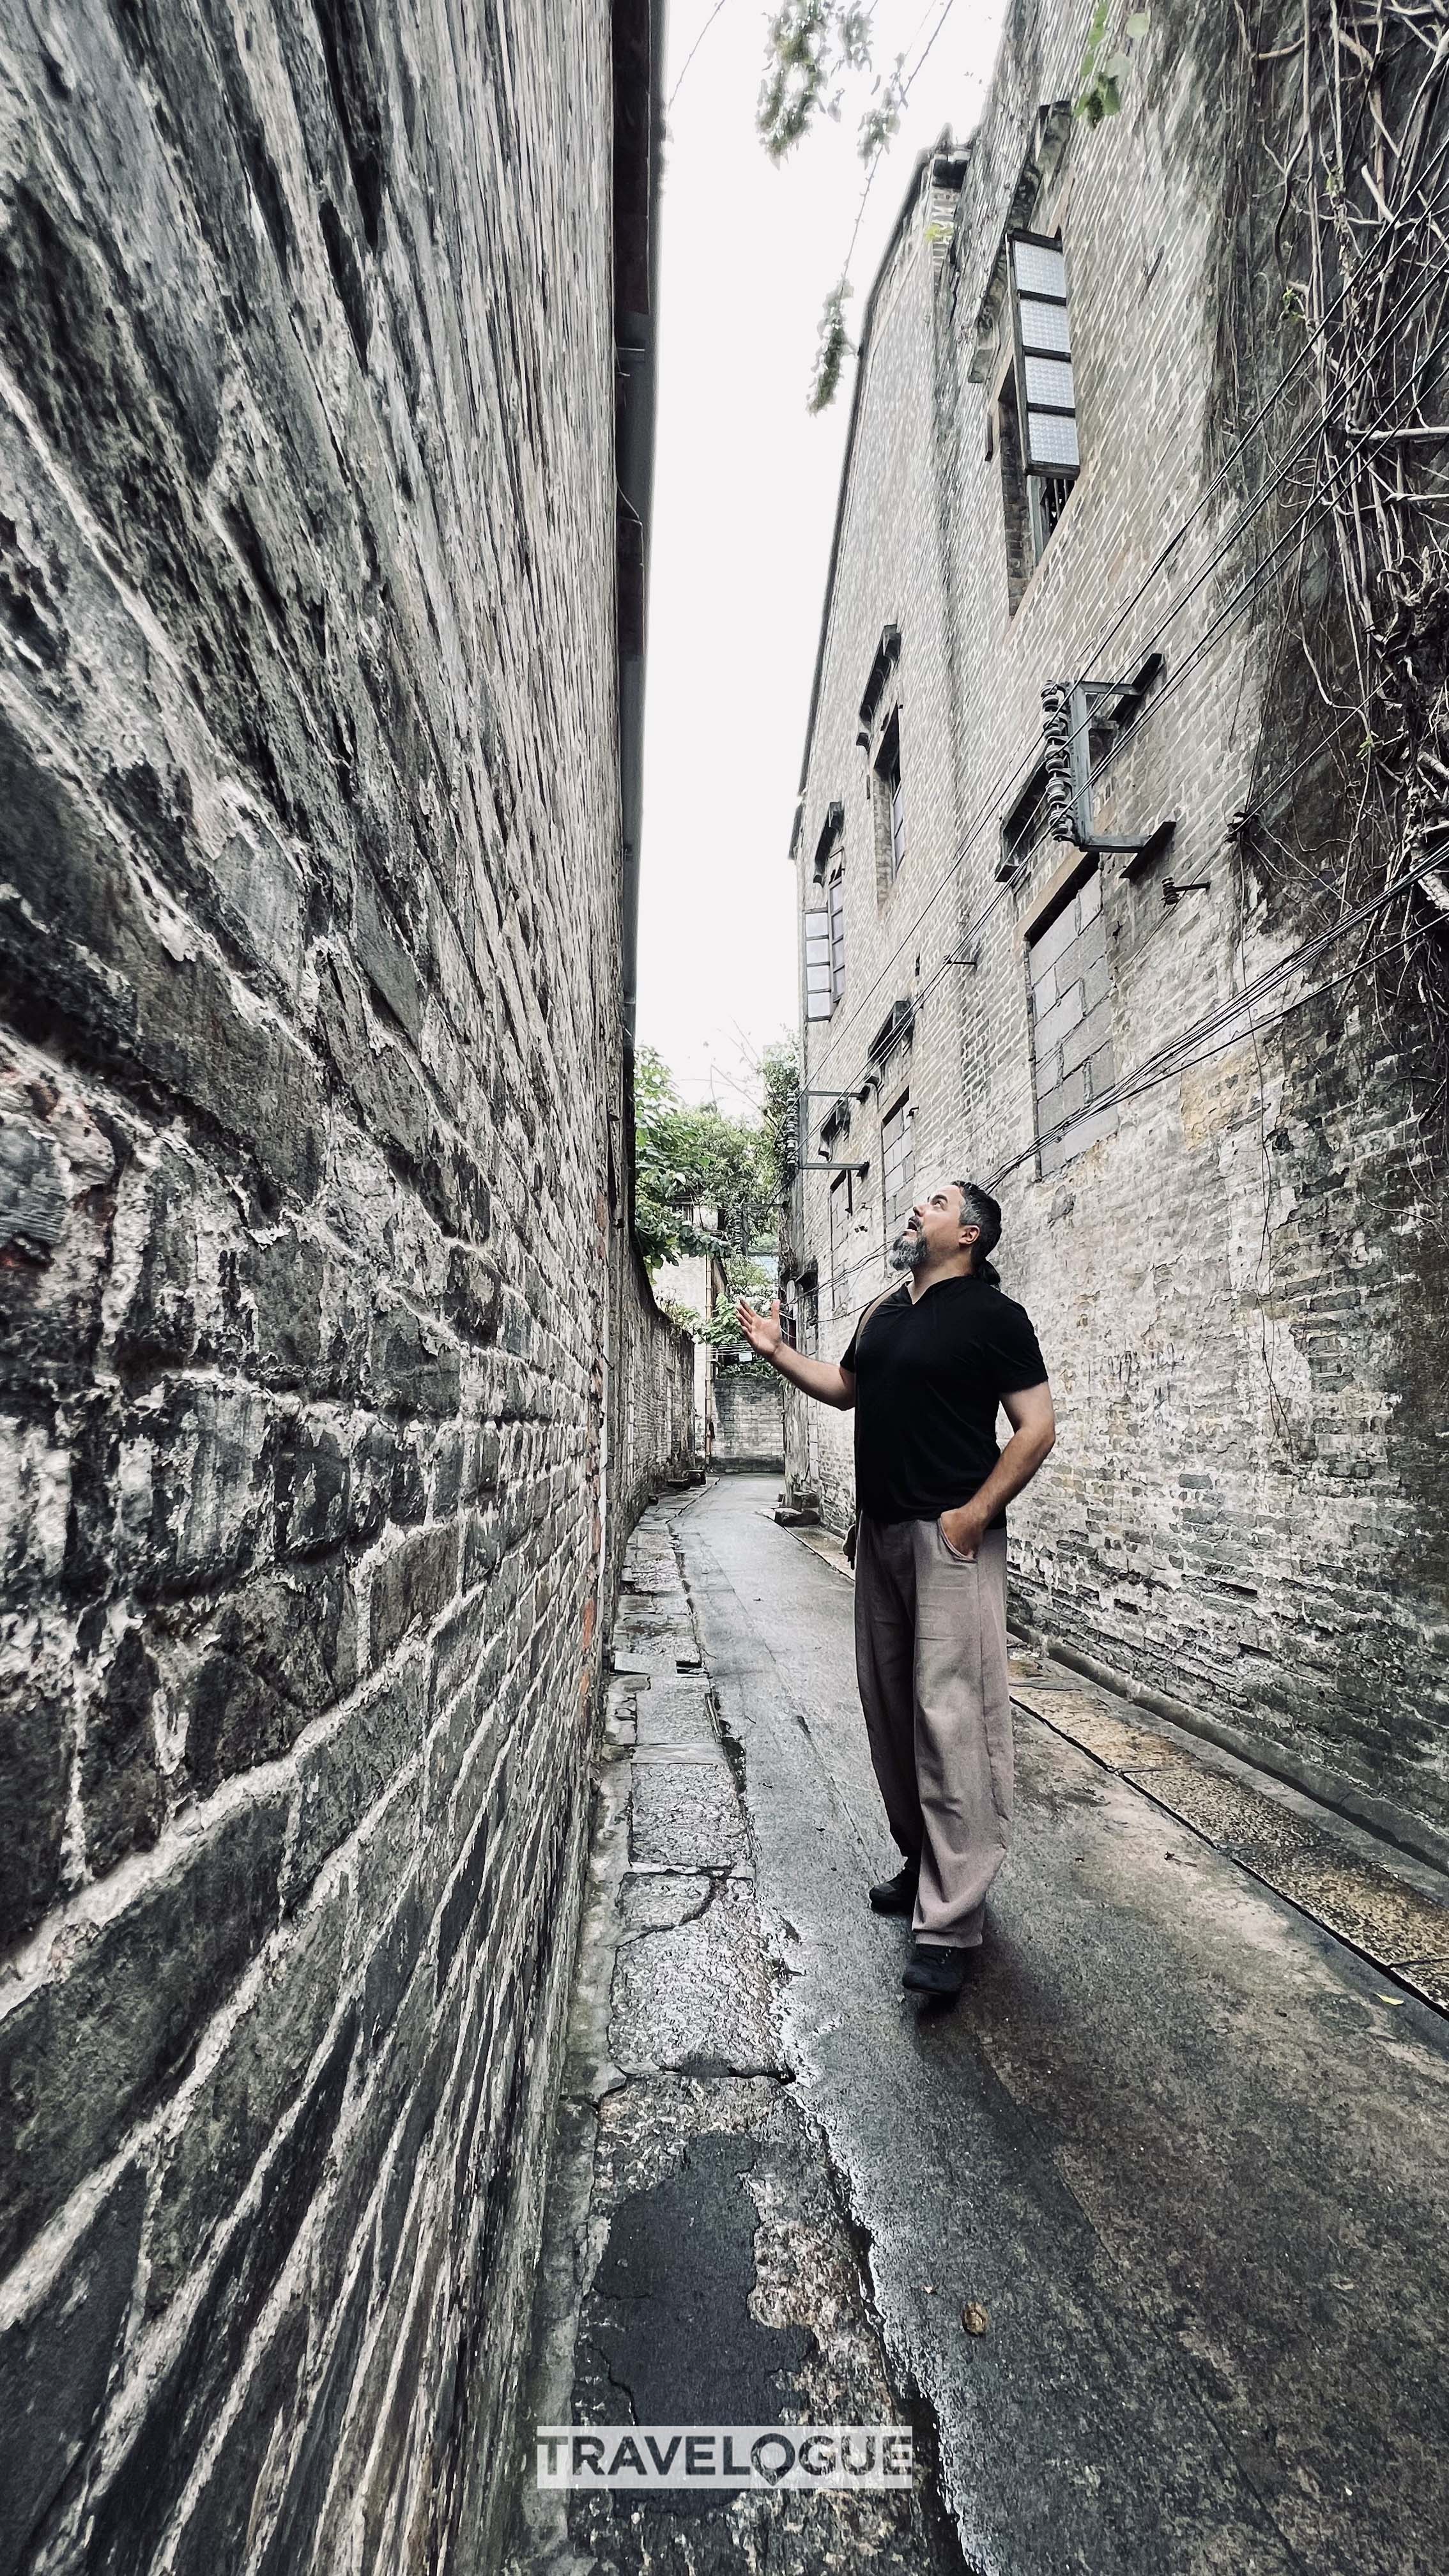 An undated photo shows a tourist sightseeing around the old streets of Foshan, Guangdong Province. /CGTN